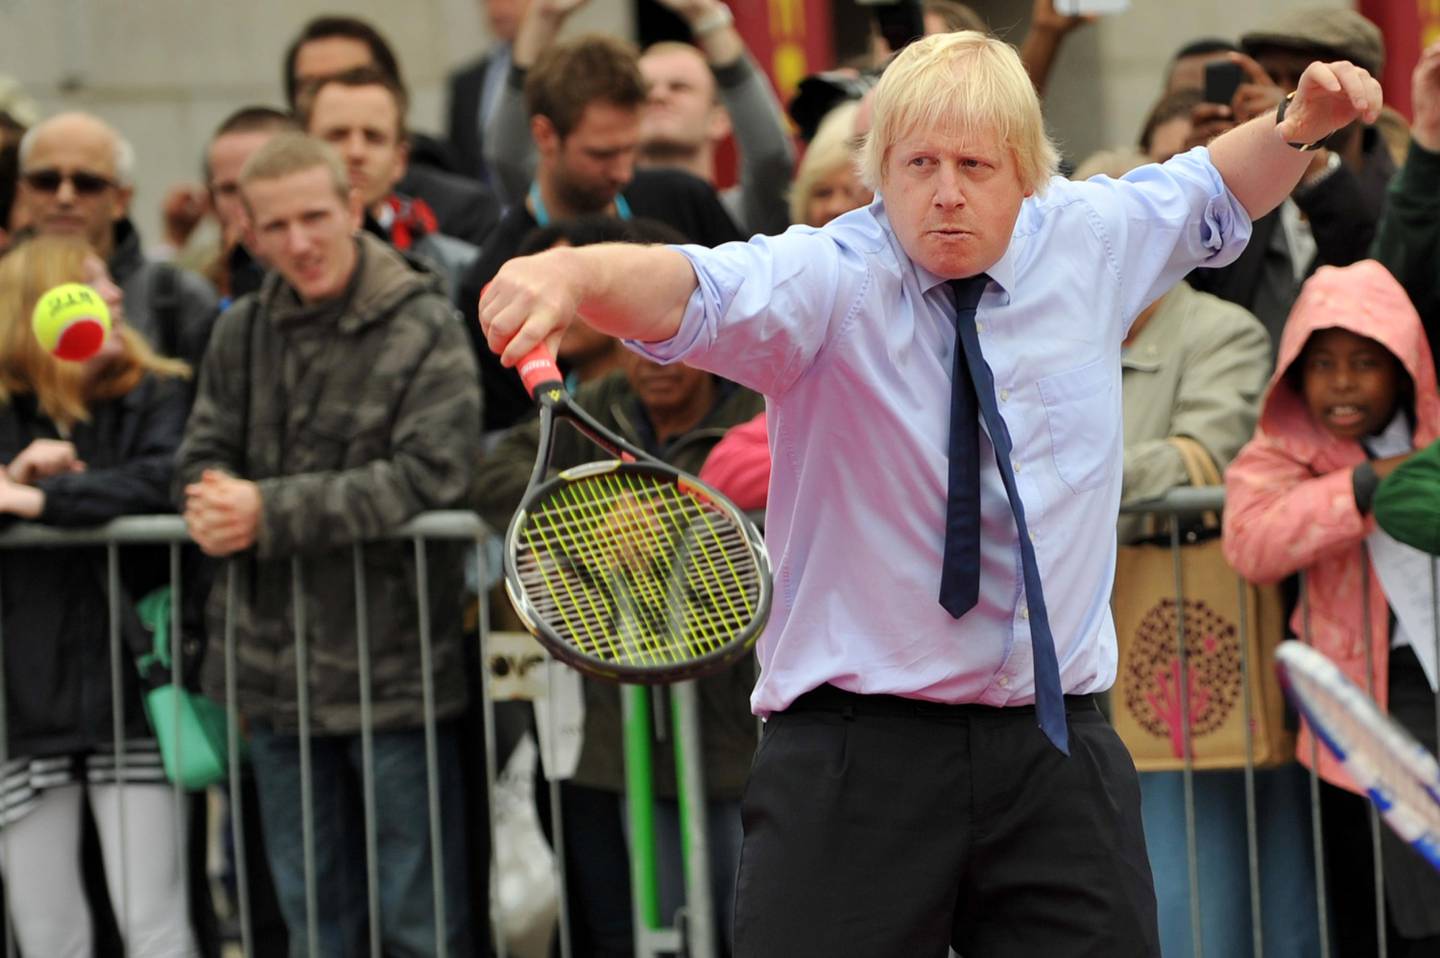 (FILES) In this file photo taken on September 08, 2011 Mayor of London, Boris Johnson plays tennis during the International Paralympic Day in Trafalgar Square, central London, on September 8, 2011. - The Conservative Party will announce the result of the leadership ballot on July 23, 2019 with former London mayor and former foreign secretary Boris Johnson widely tipped to win the race to lead the party and take up office at 10 Downing Street. (Photo by Ben STANSALL / AFP)